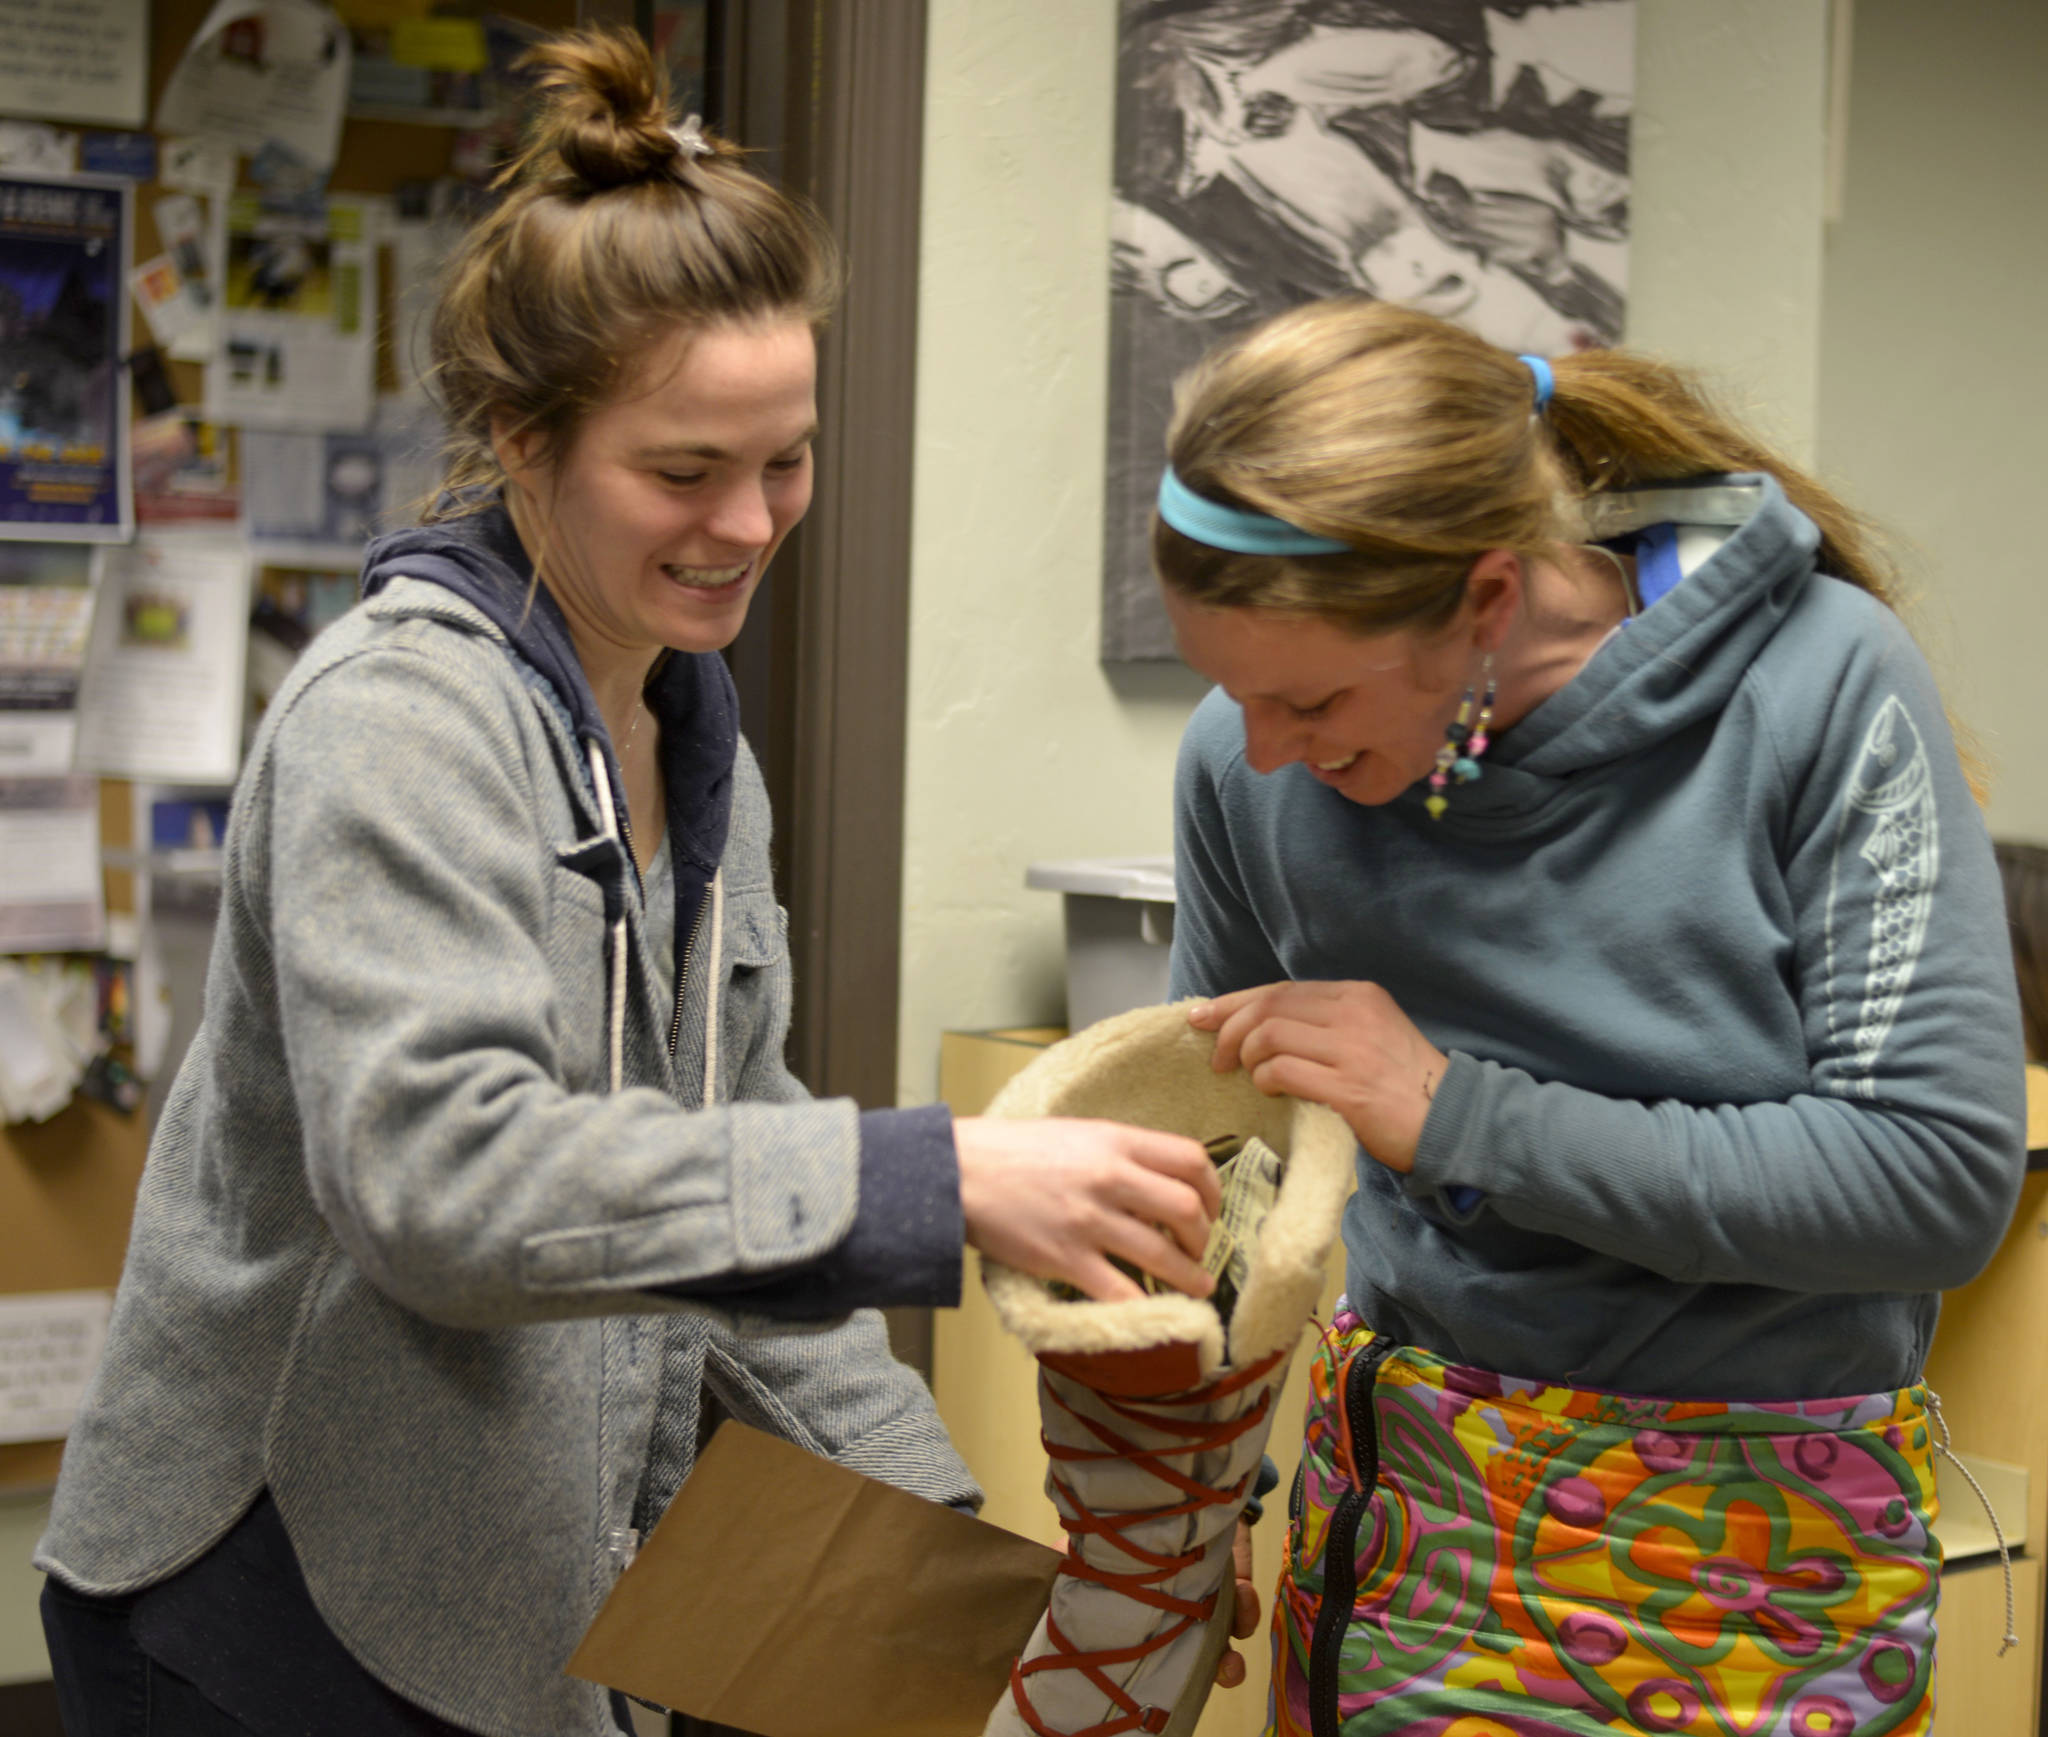 Kaitlin Vadla, left, of Cook Inletkeeper, returned Monica Zappa’s boot full of donations and tips for winning her fourth Iditarod at the Stand For Salmon send-off event on Tuesday, Feb. 28 2017, at Odie’s Deli in Soldotna. (Kat Sorensen/Peninsula Clarion)